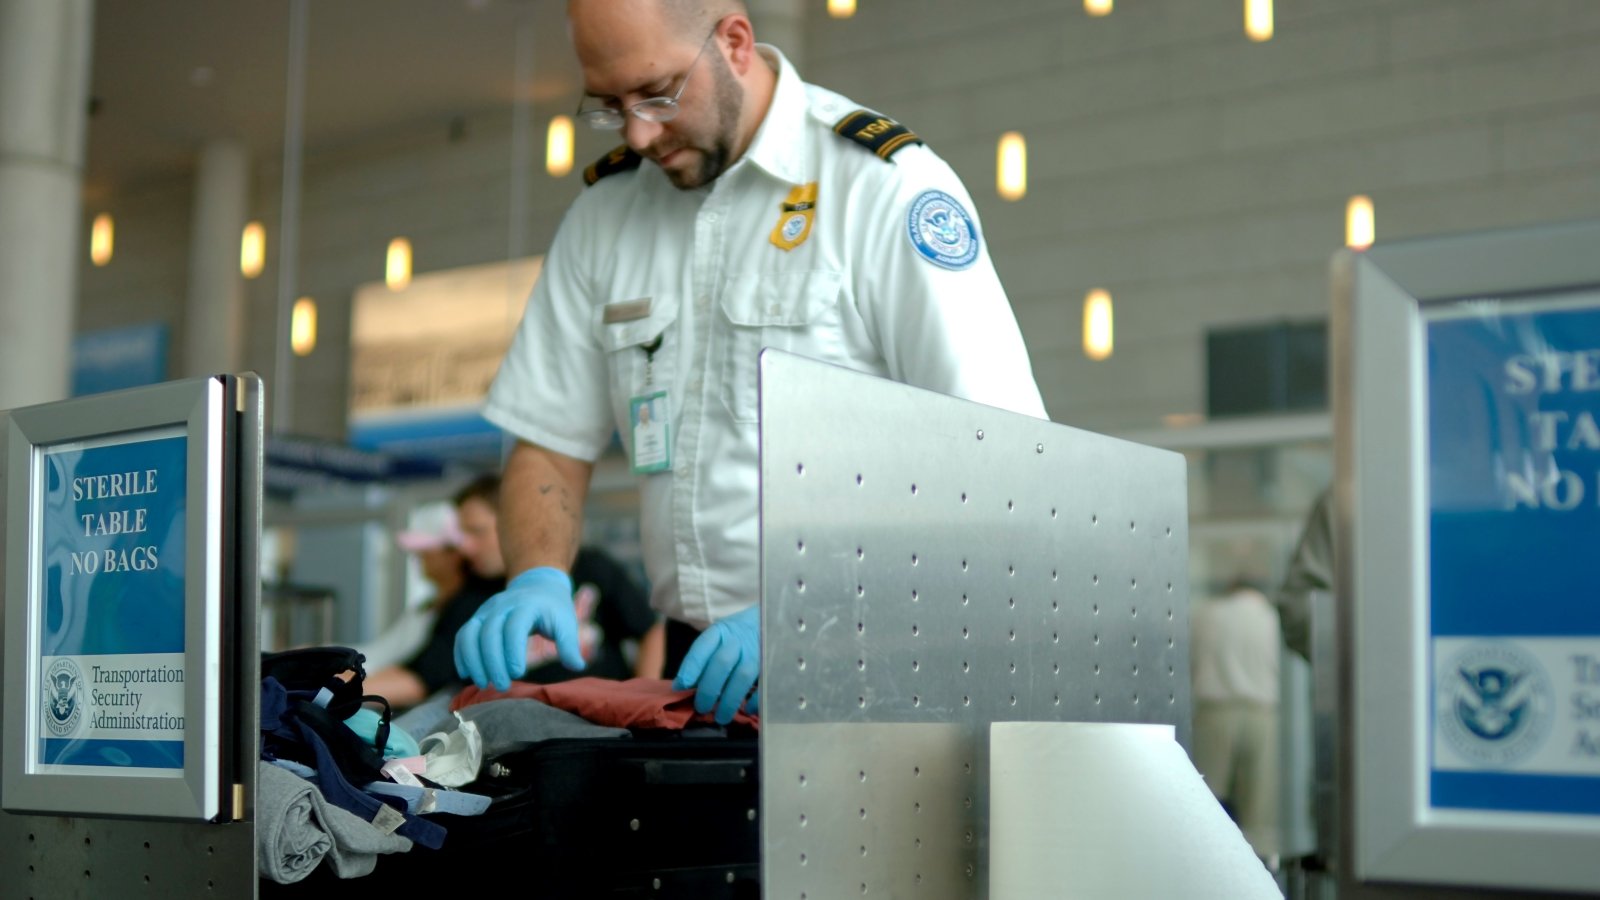 <p><span>The convenience of online check-in has transformed the pre-flight experience. In the past, all passengers had to queue up at the airport counter, even if they didn’t have bags to check, leading to longer wait times and a less streamlined process.</span></p>